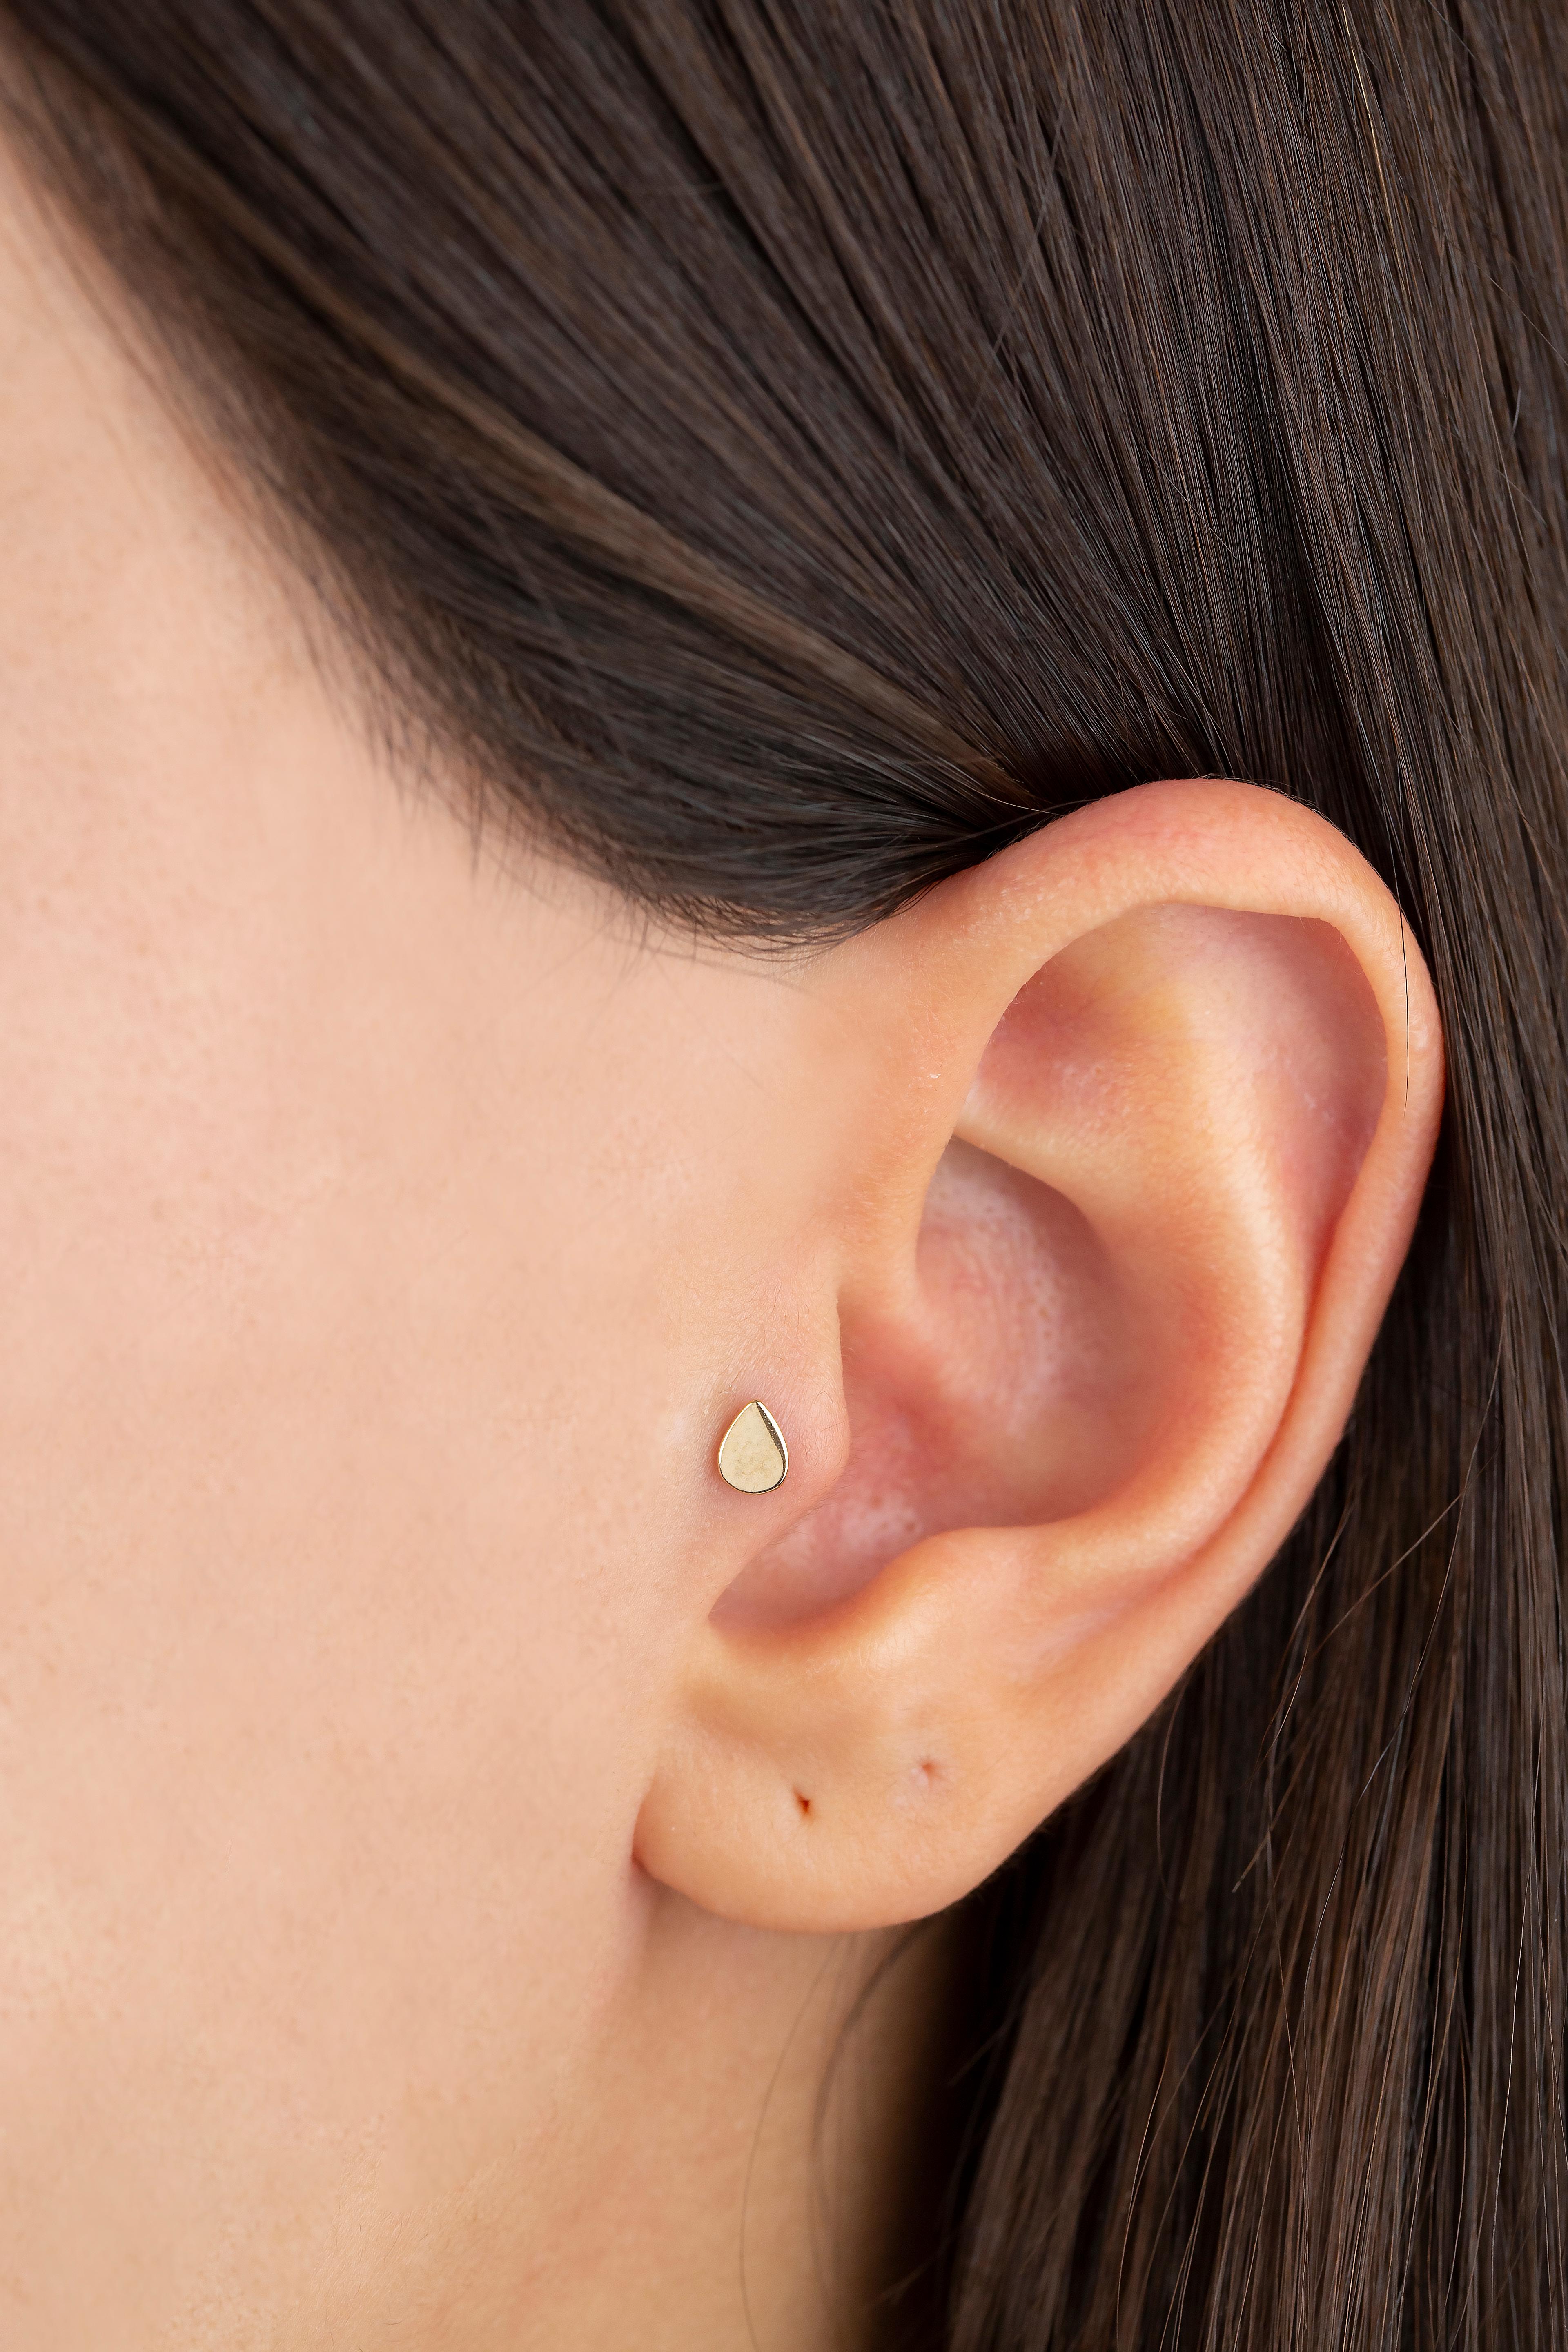 14K Gold Drop Shape Piercing, Pear Shape Gold Stud Earring

You can use the piercing as an earring too! Also this piercing is suitable for tragus, nose, helix, lobe, flat, medusa, monreo, labret and stud.

This piercing was made with quality